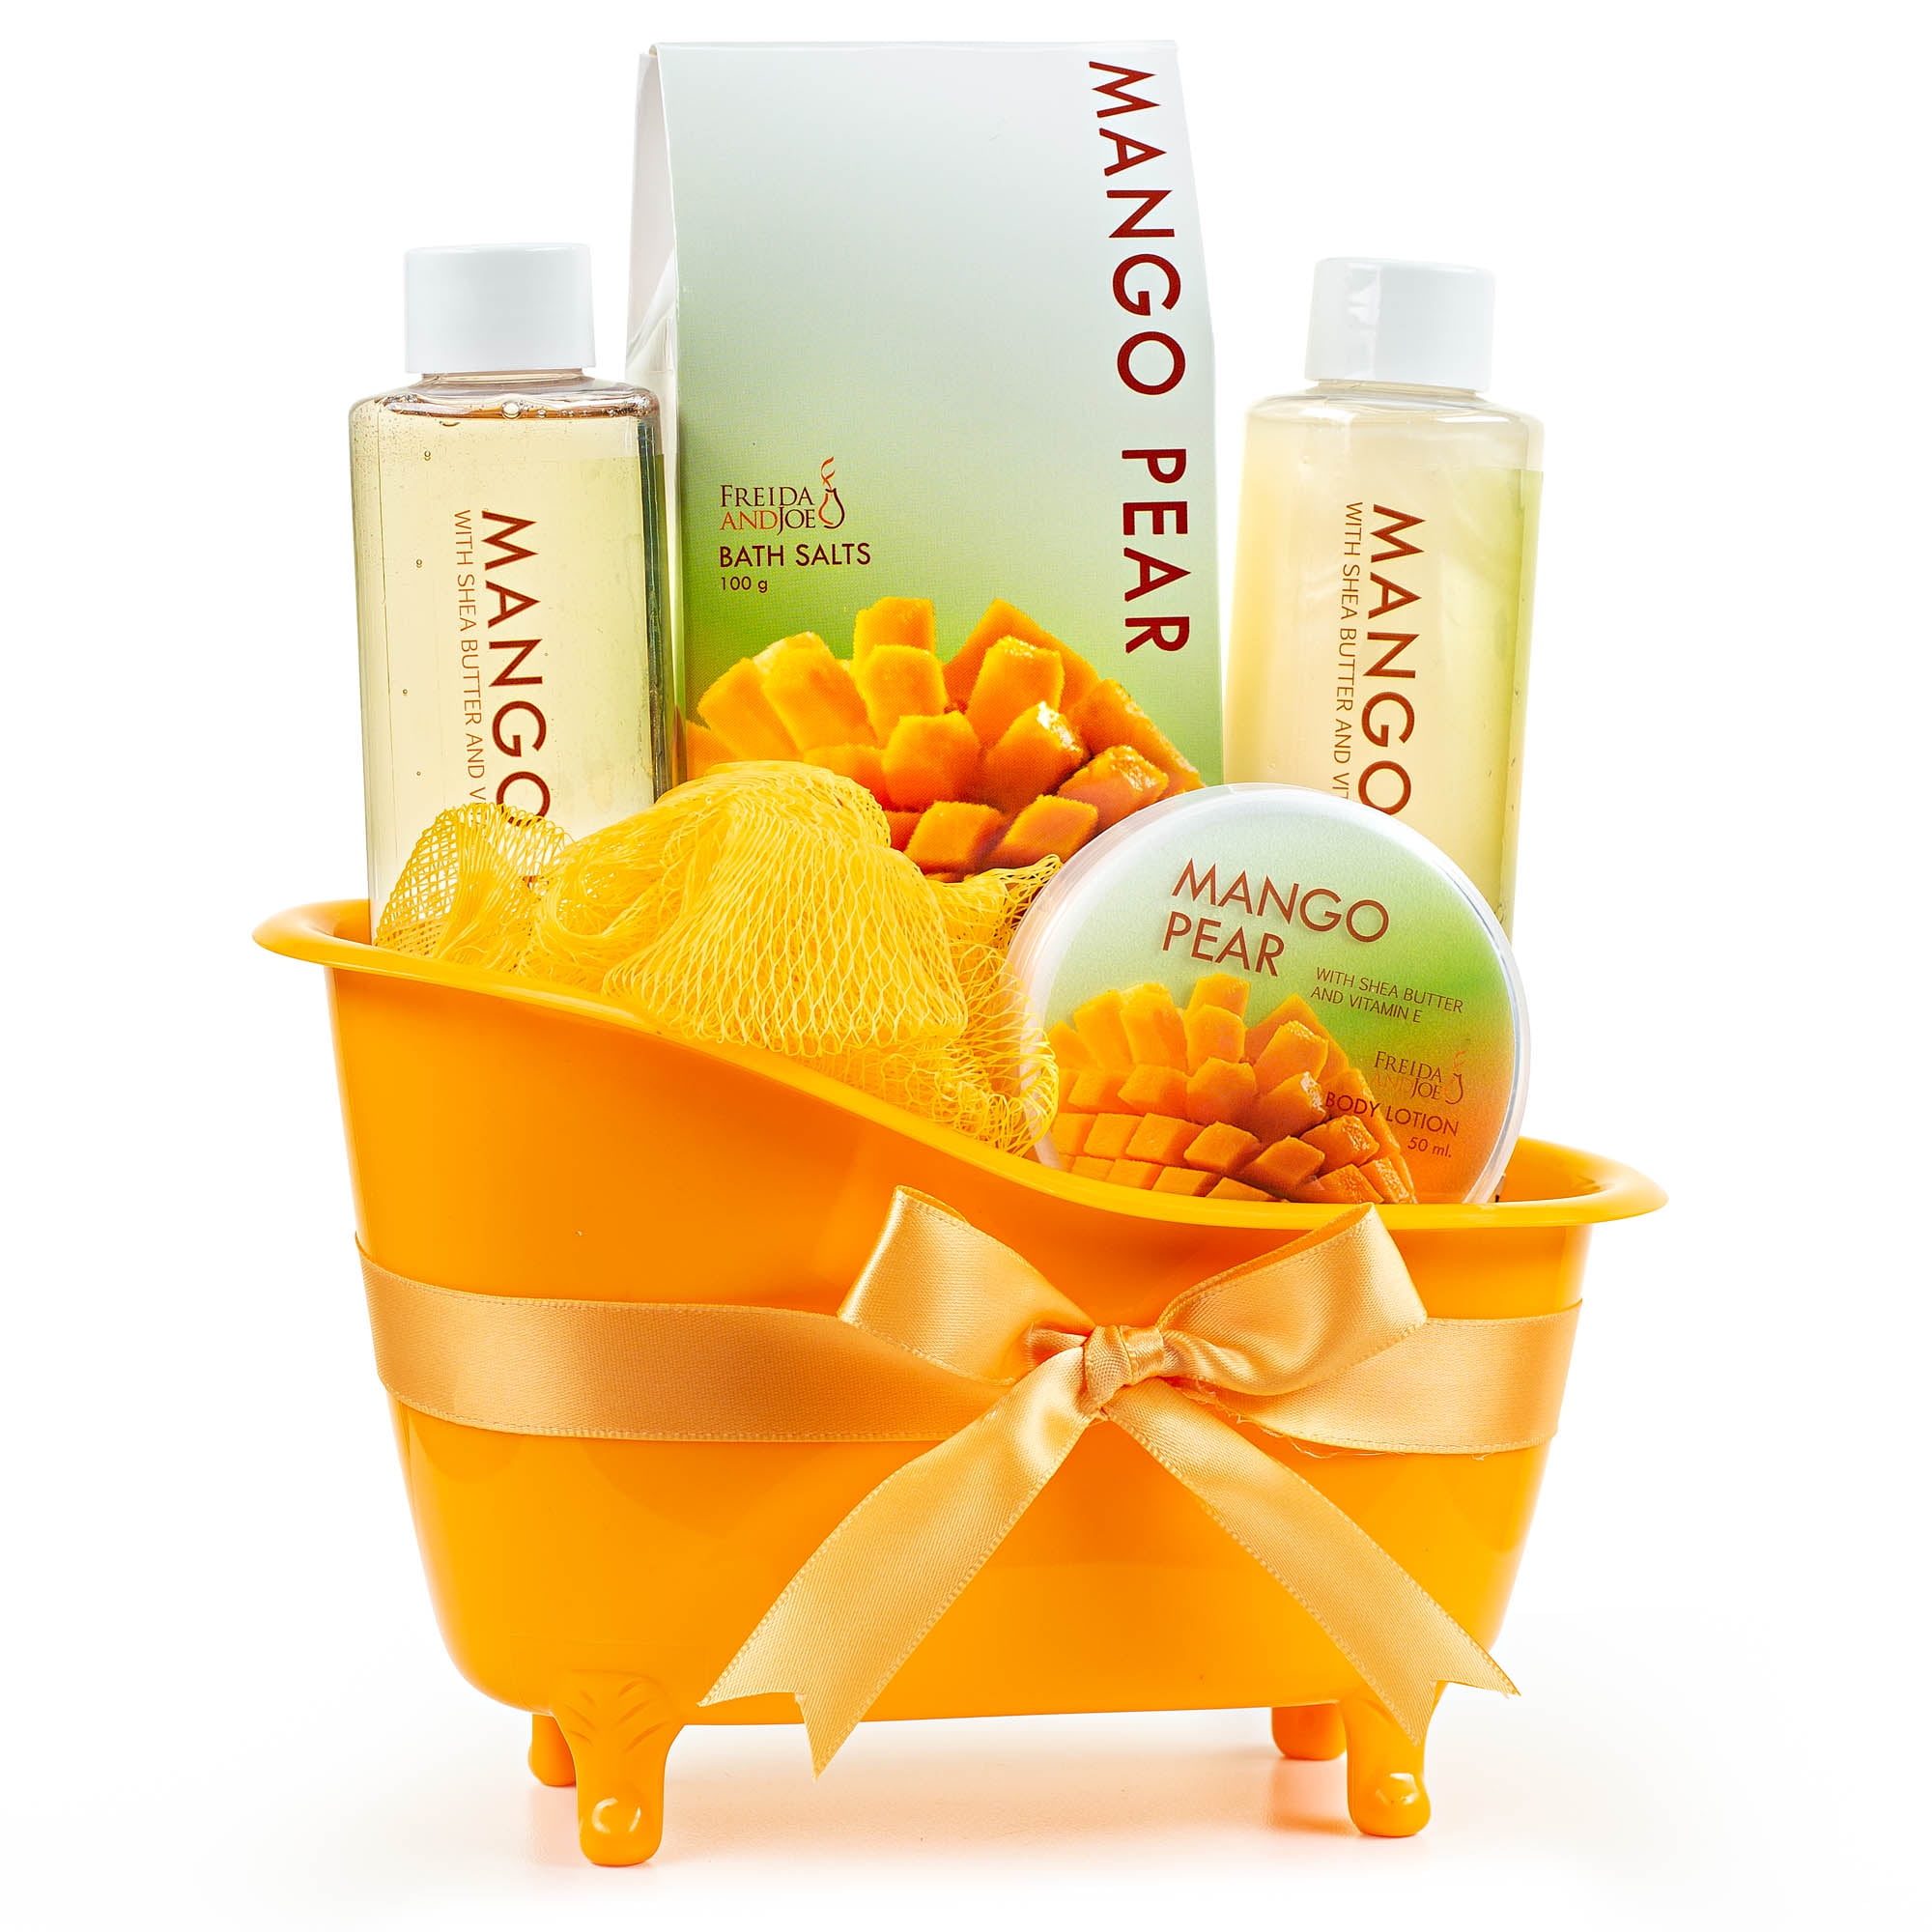 Freida & Joe Tropical Tangy Mango Pears Spa Bath Gift Set - Gift for Her Luxury Body Care Mothers Day Gifts for Mom - image 1 of 3